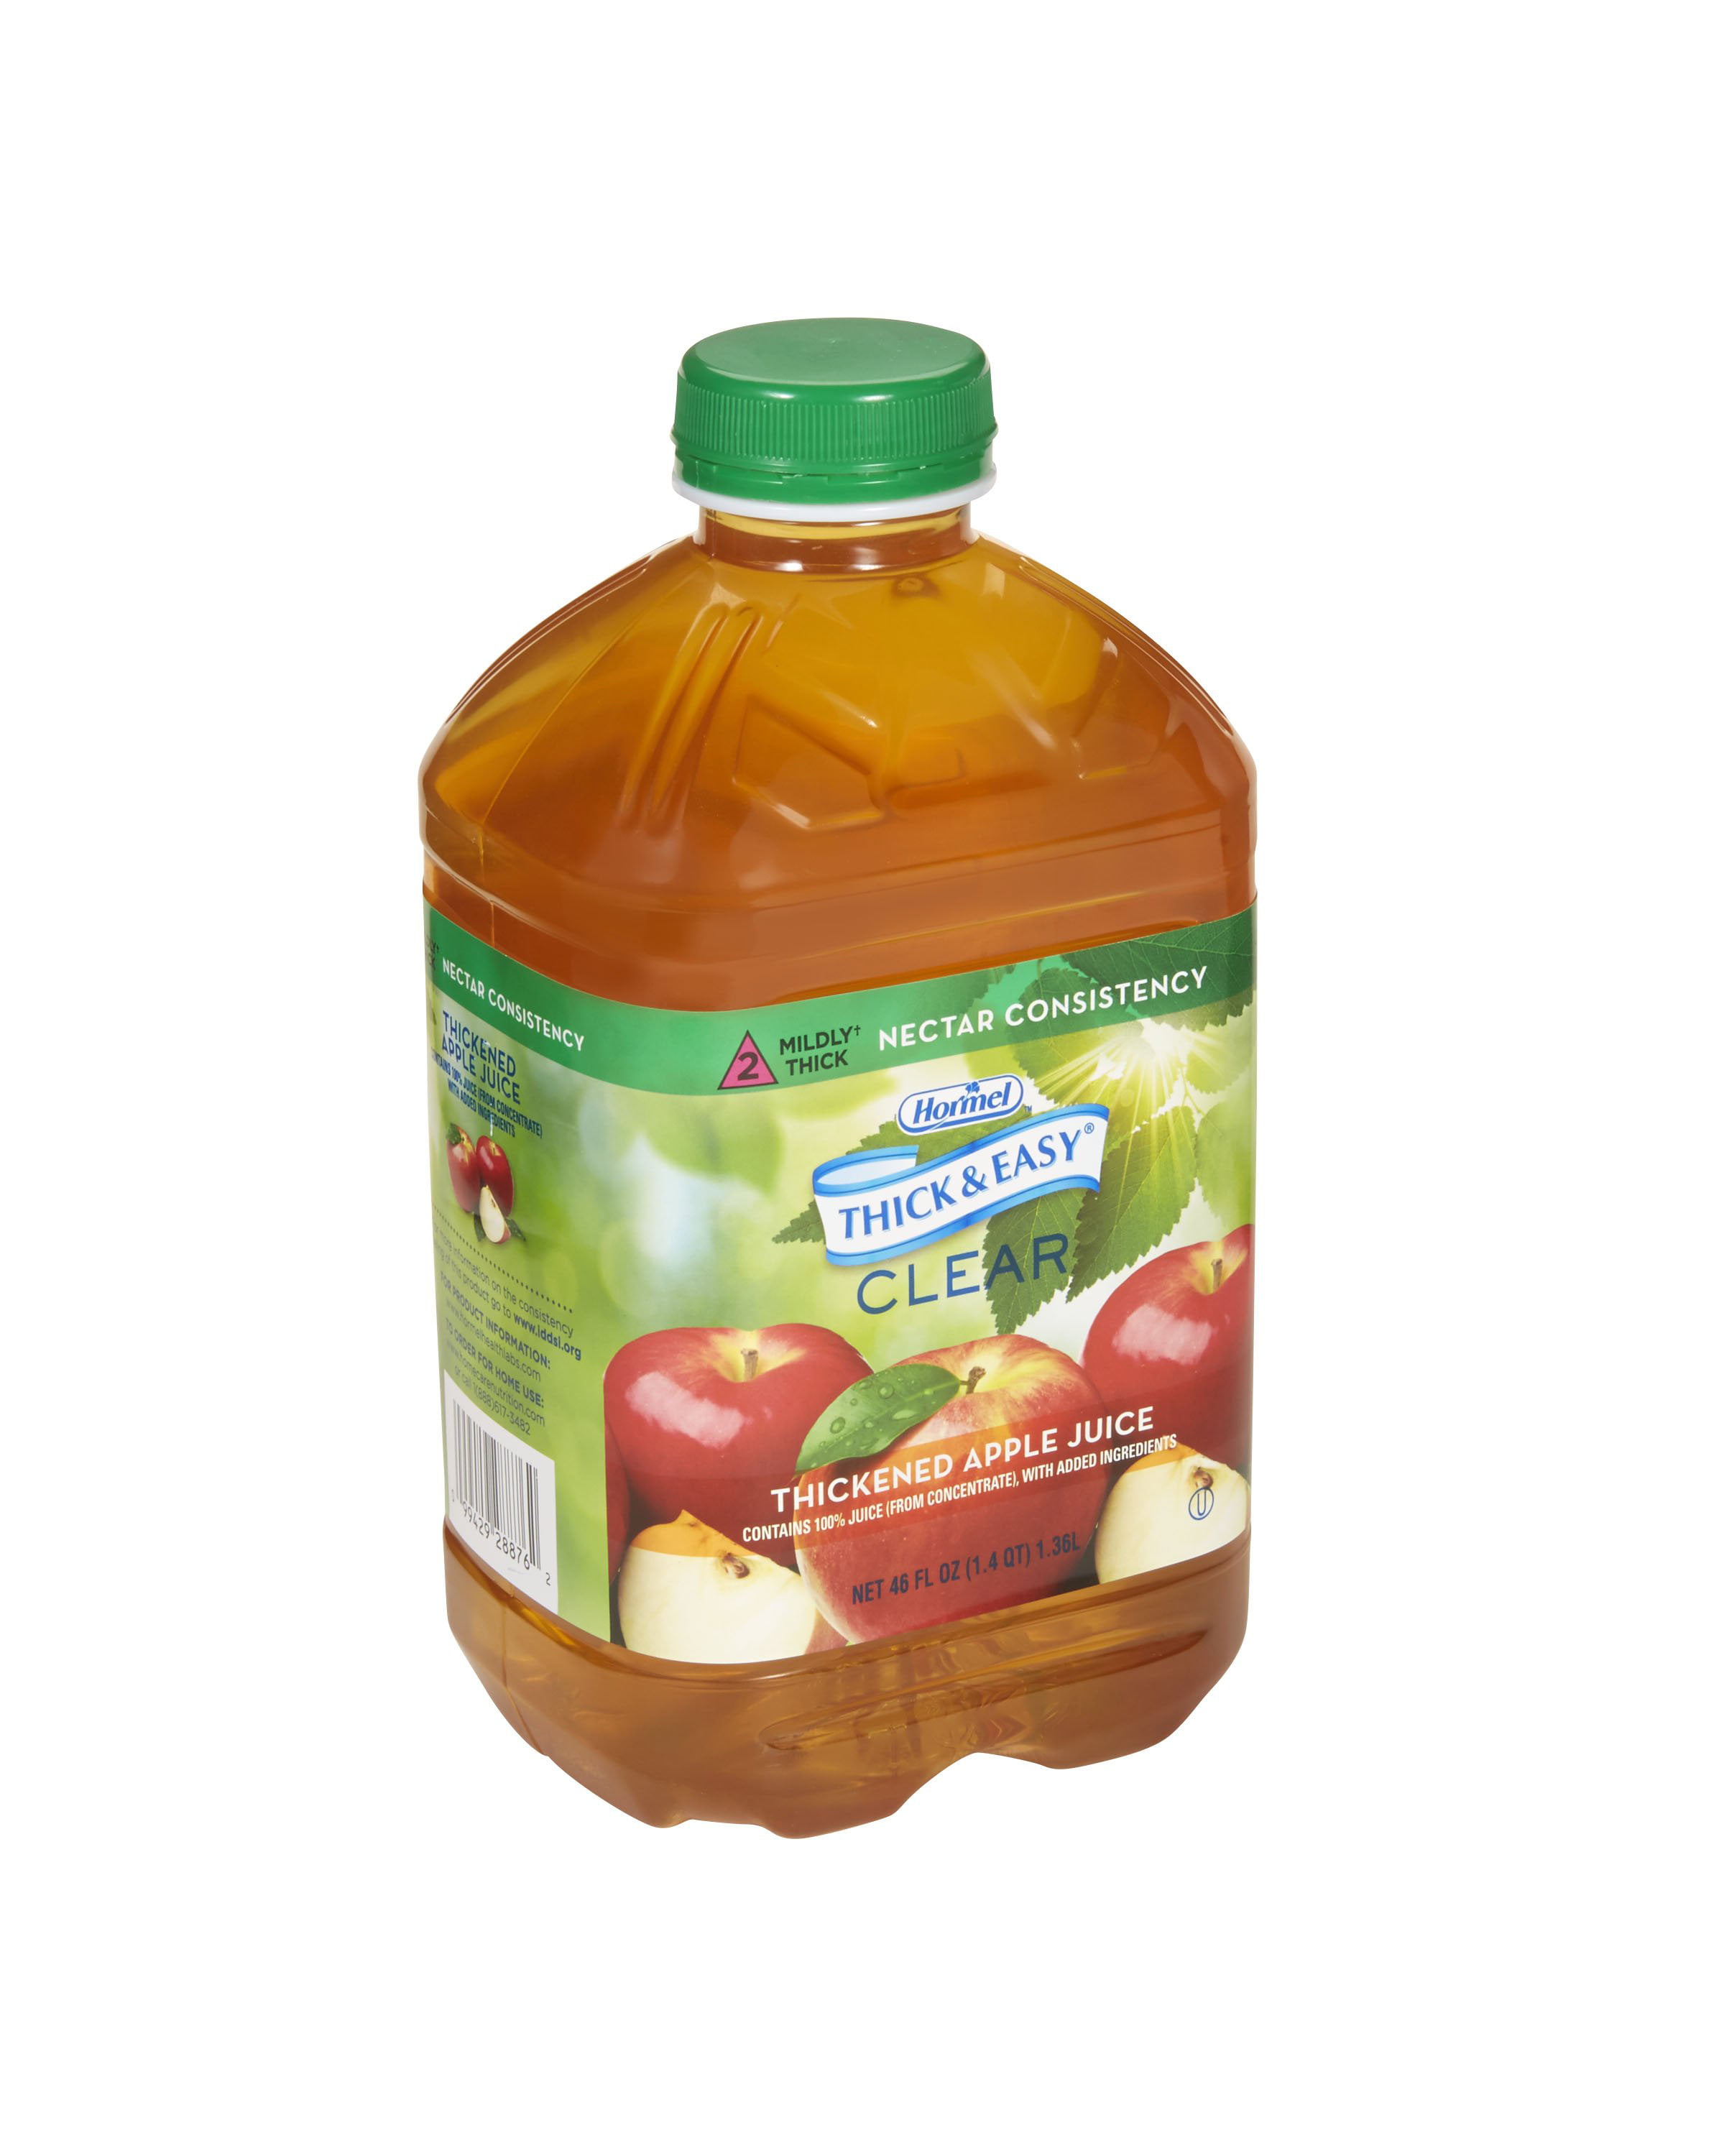 Thick-It Thickened Apple Juice, Honey Consistency, 8oz bottles